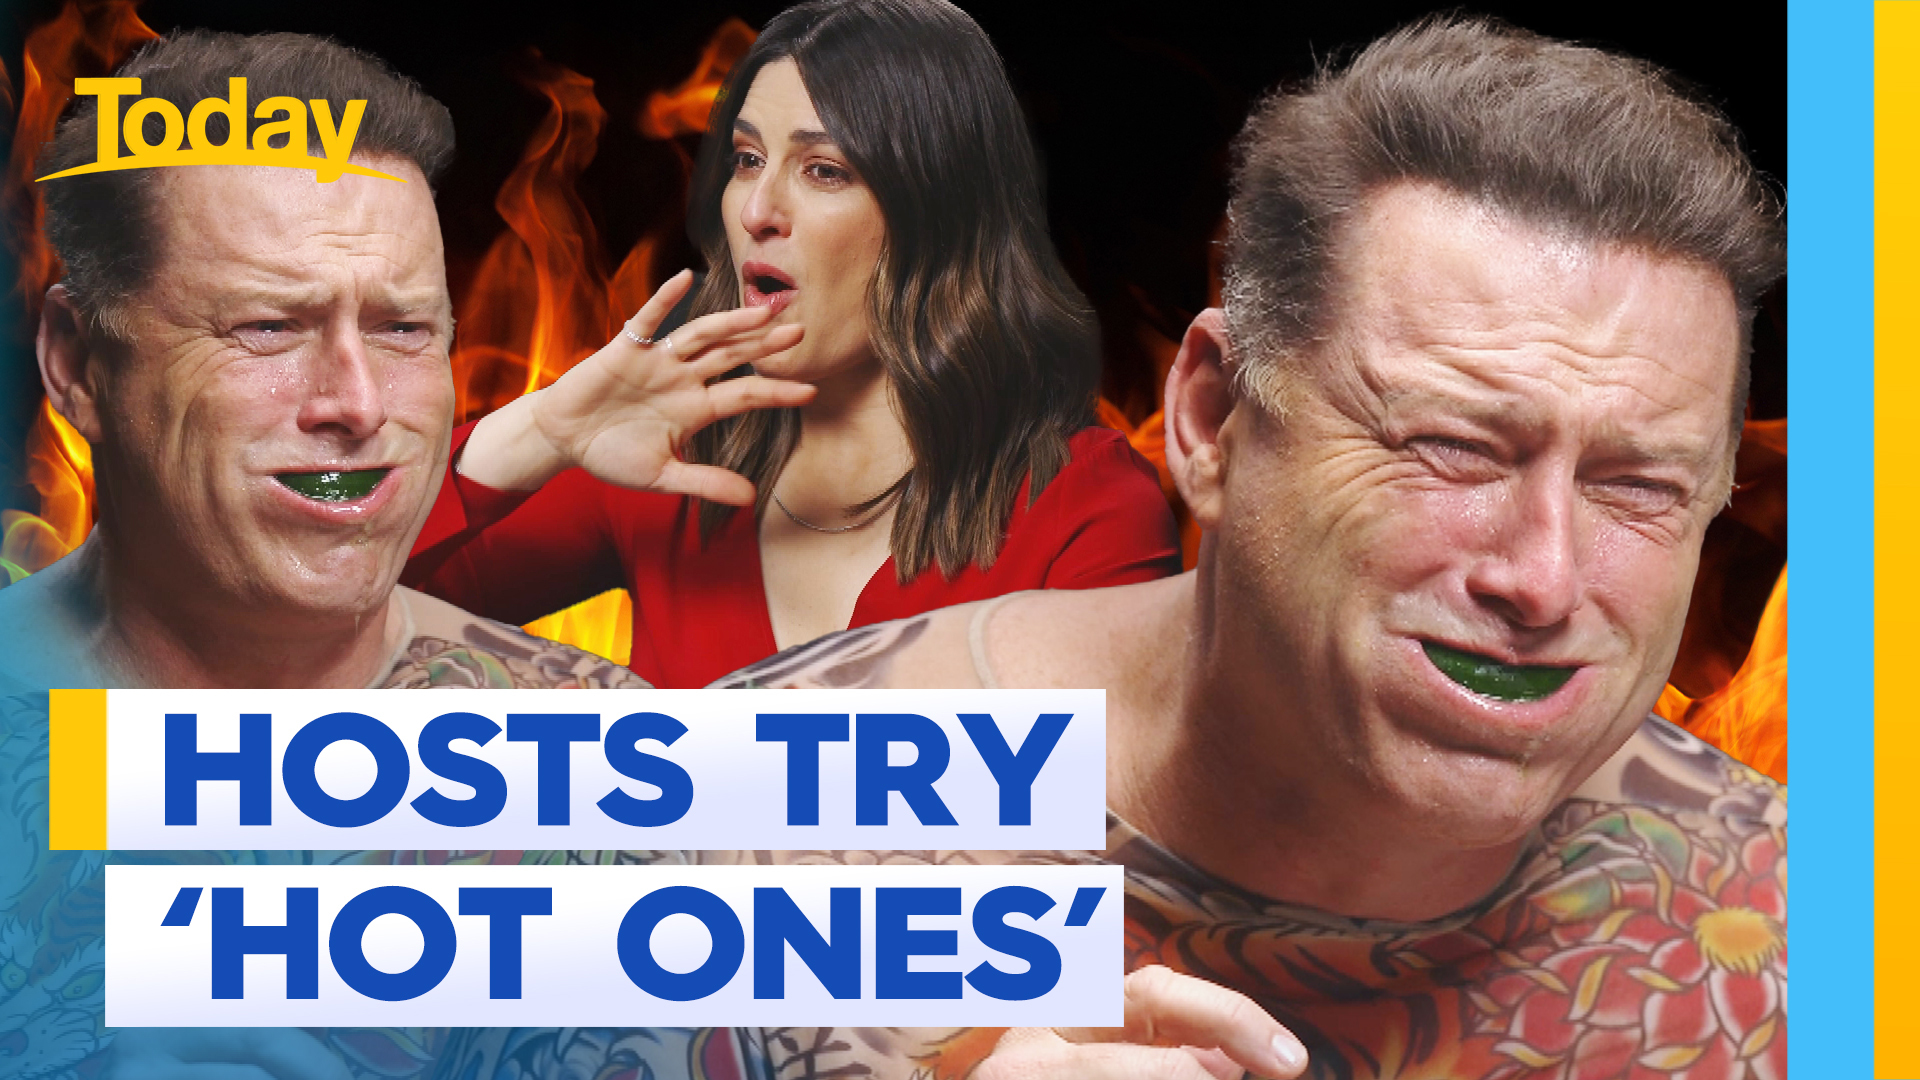 Today hosts take on the Hot Ones challenge